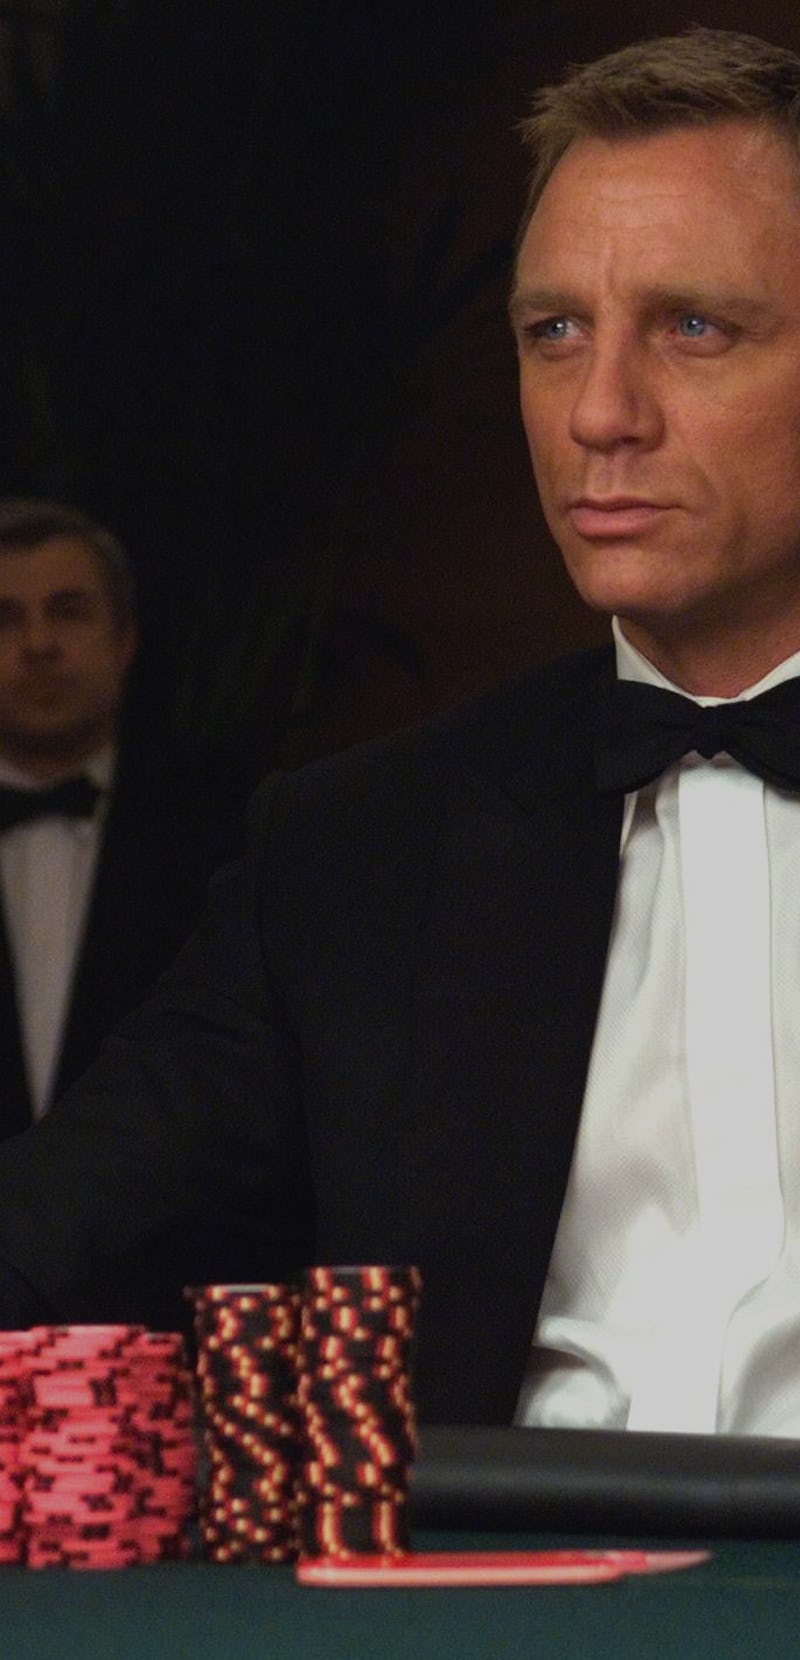 Daniel Craig as James Bond at poker table from Casino Royale